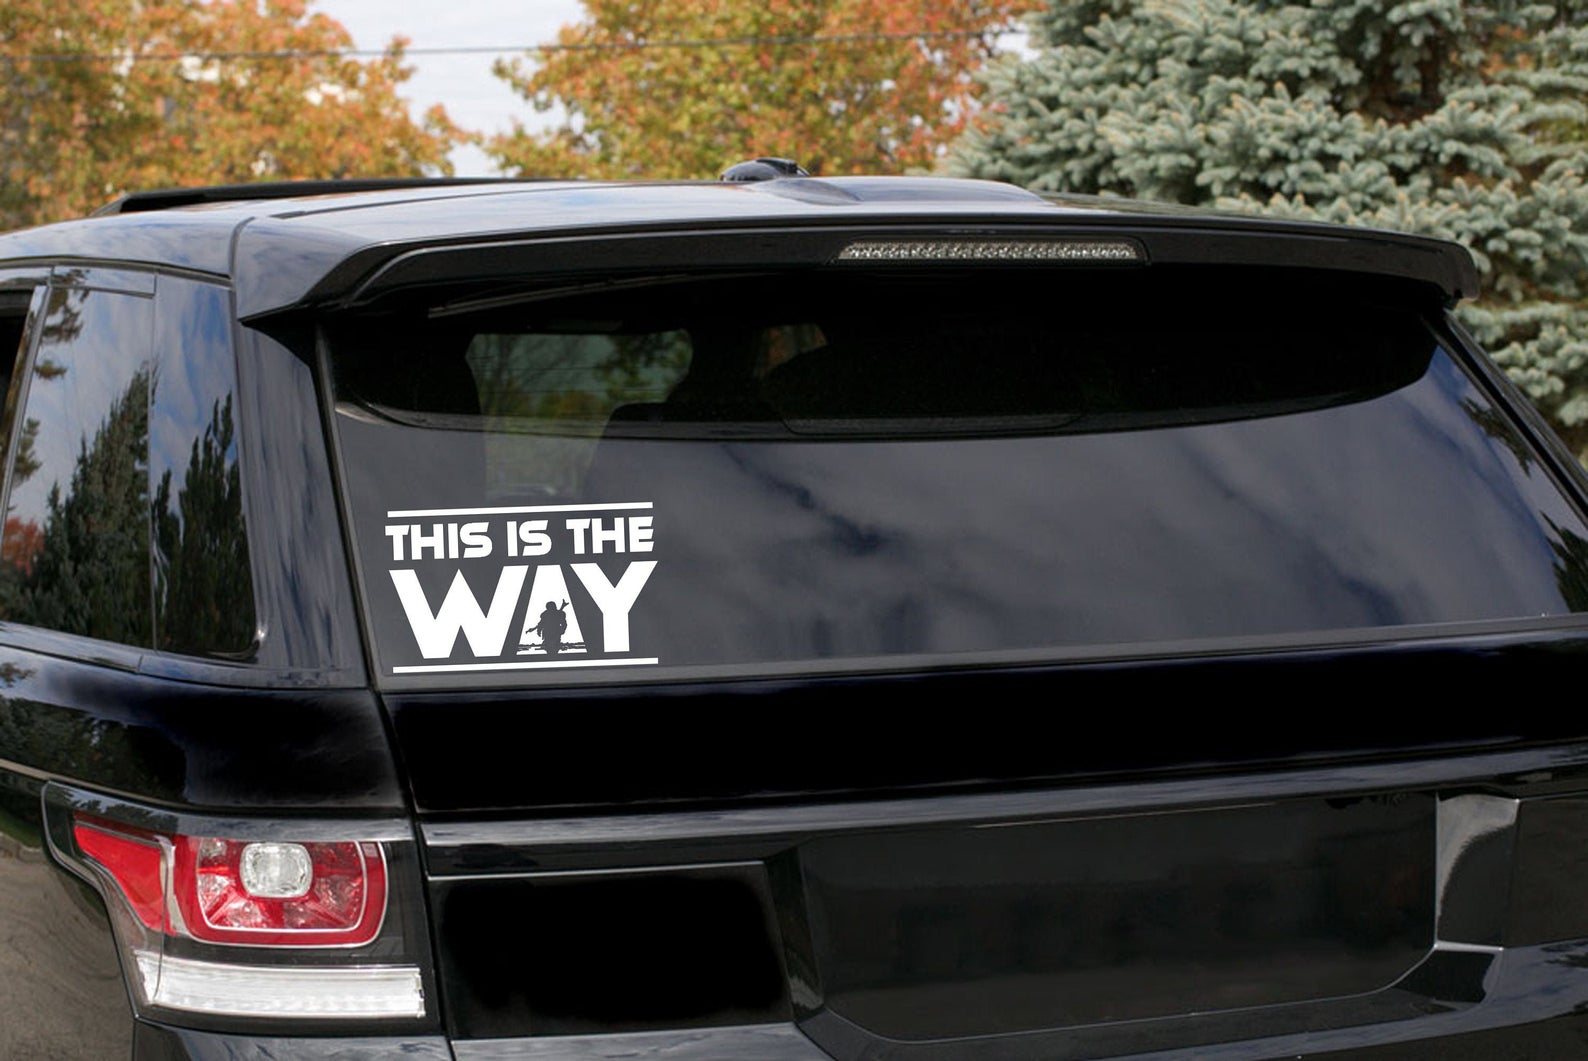 Download New "This is the Way" Vinyl Decal Is Perfect For Your Car